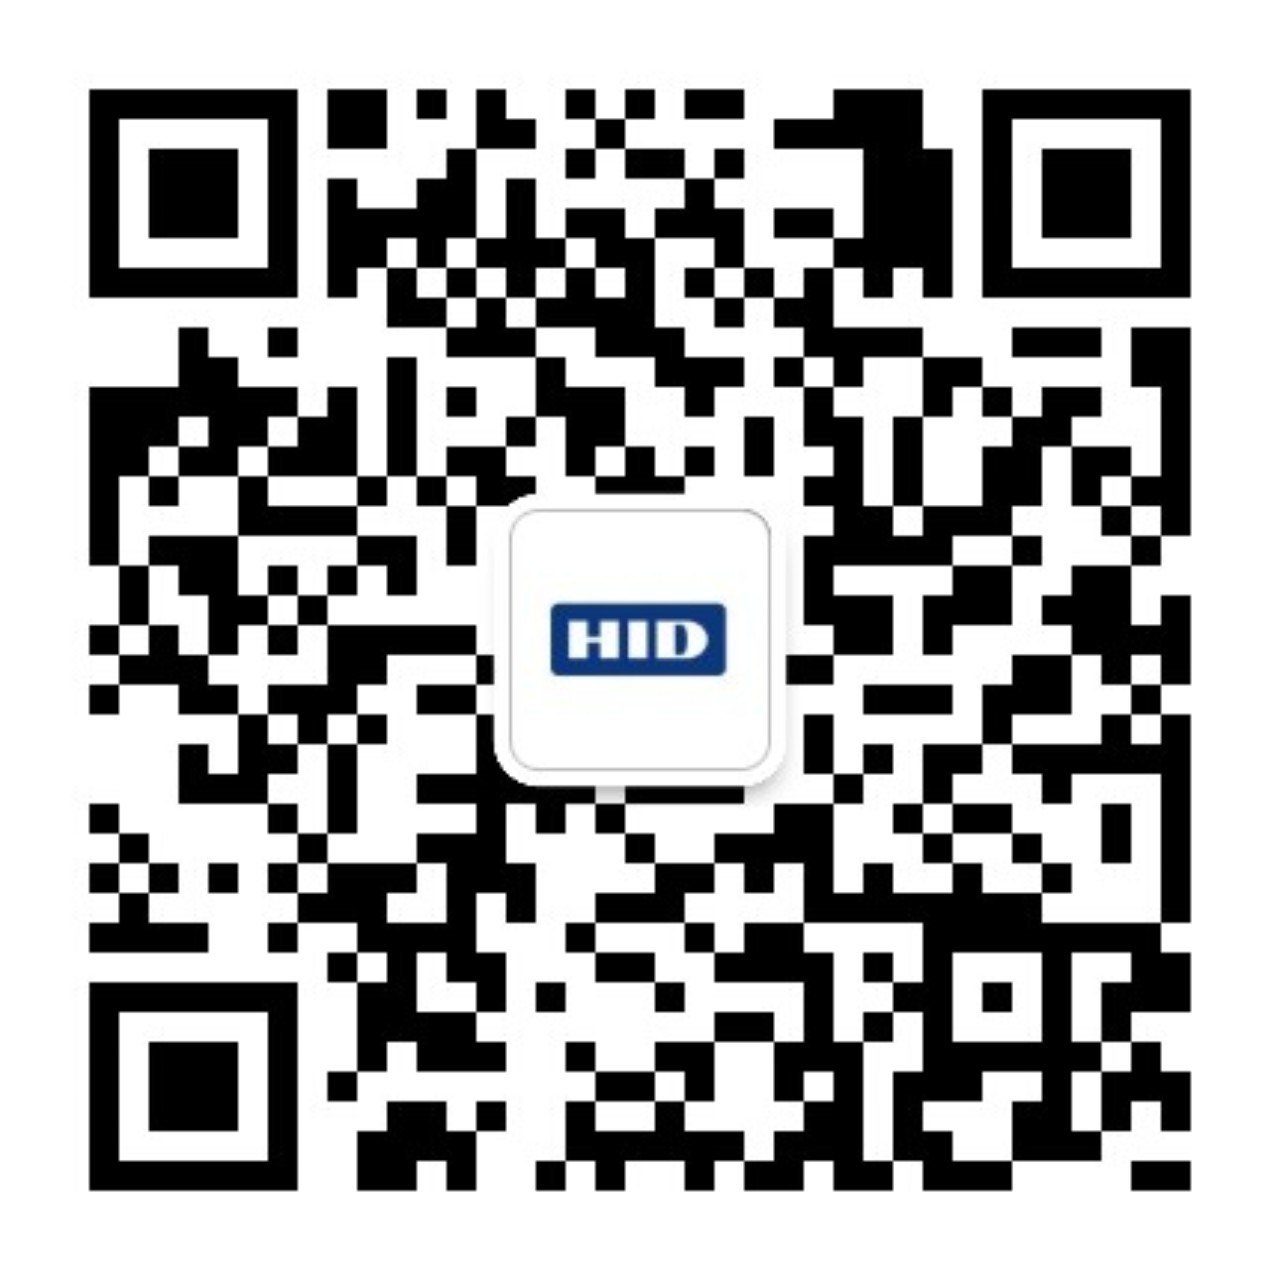 HID on WeChat